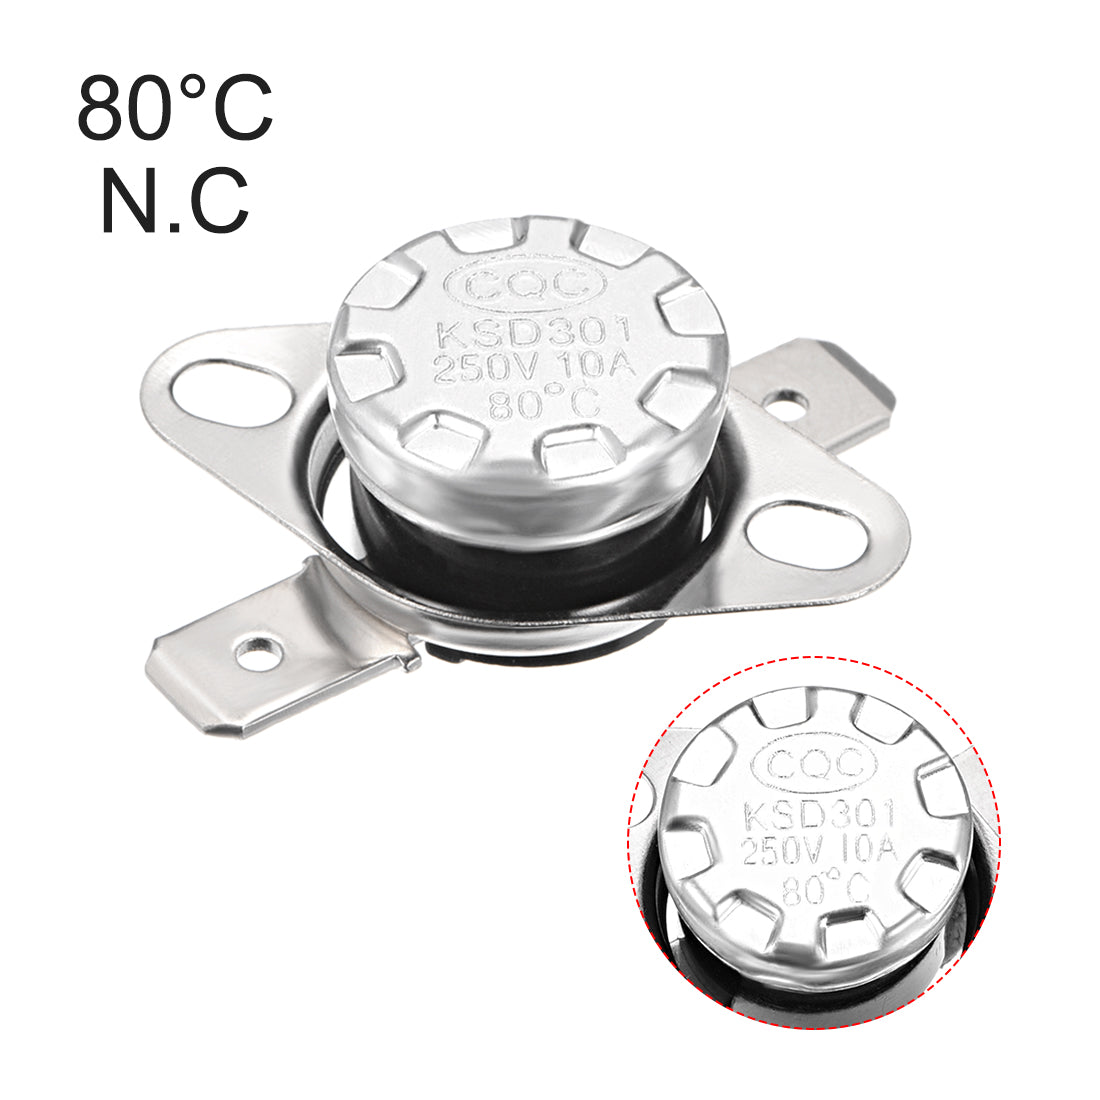 uxcell Uxcell Temperature Control Switch , Thermostat , KSD301 80°C , 10A , Normally Closed N.C 6.3mm Pin 5pcs